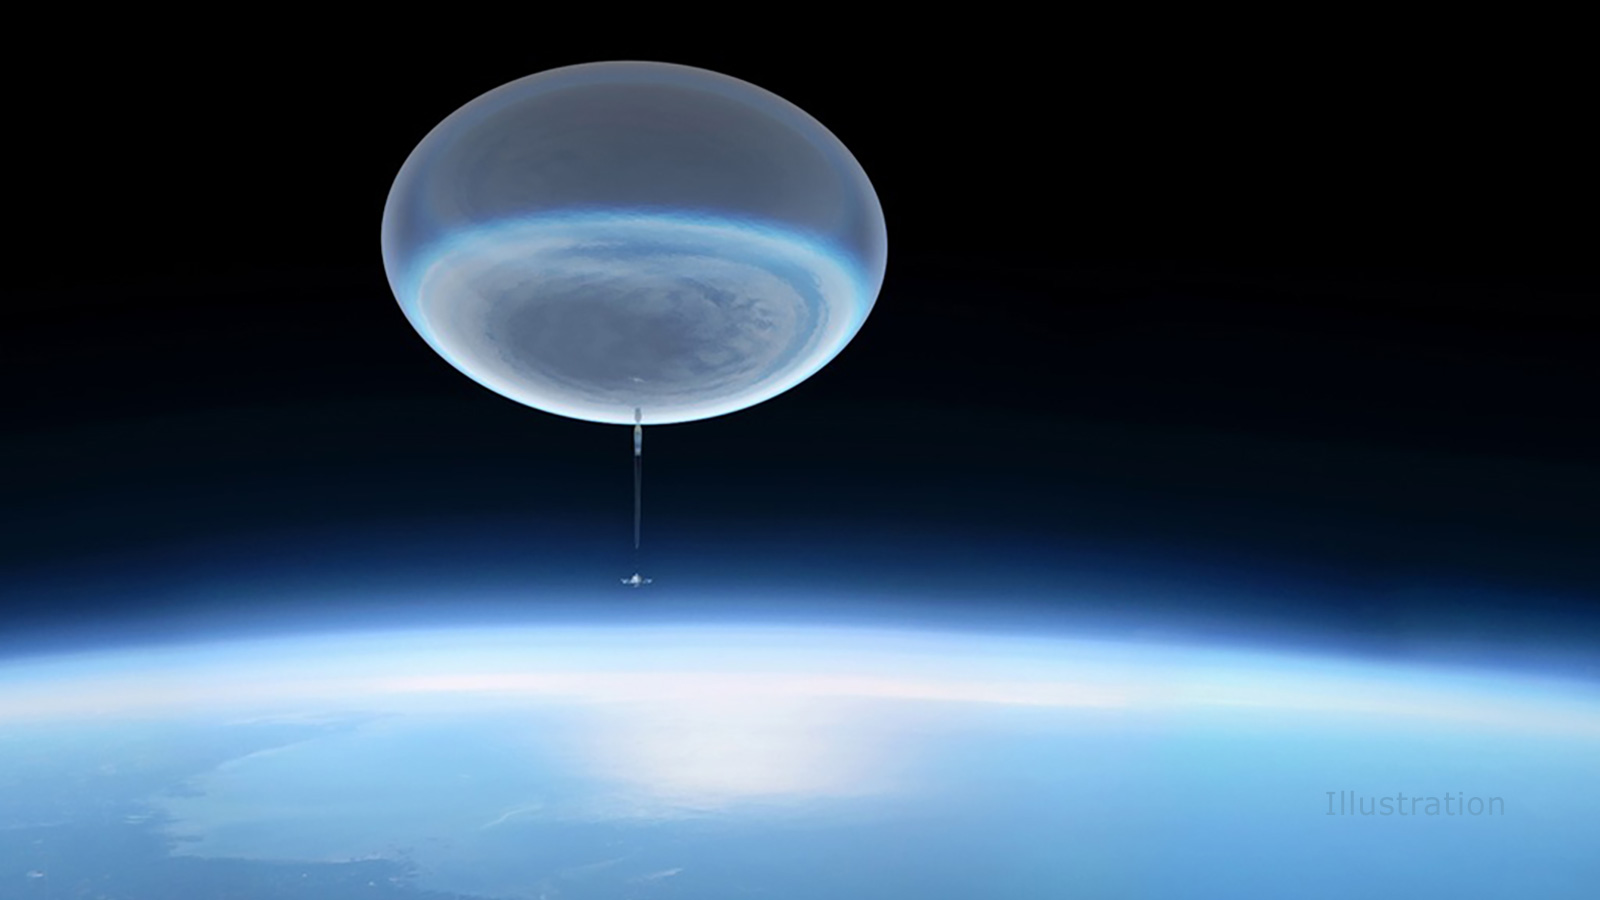 An illustration shows a reflective balloon floating in Earth's stratosphere carrying a device covered in metal scaffolding and solar panels.